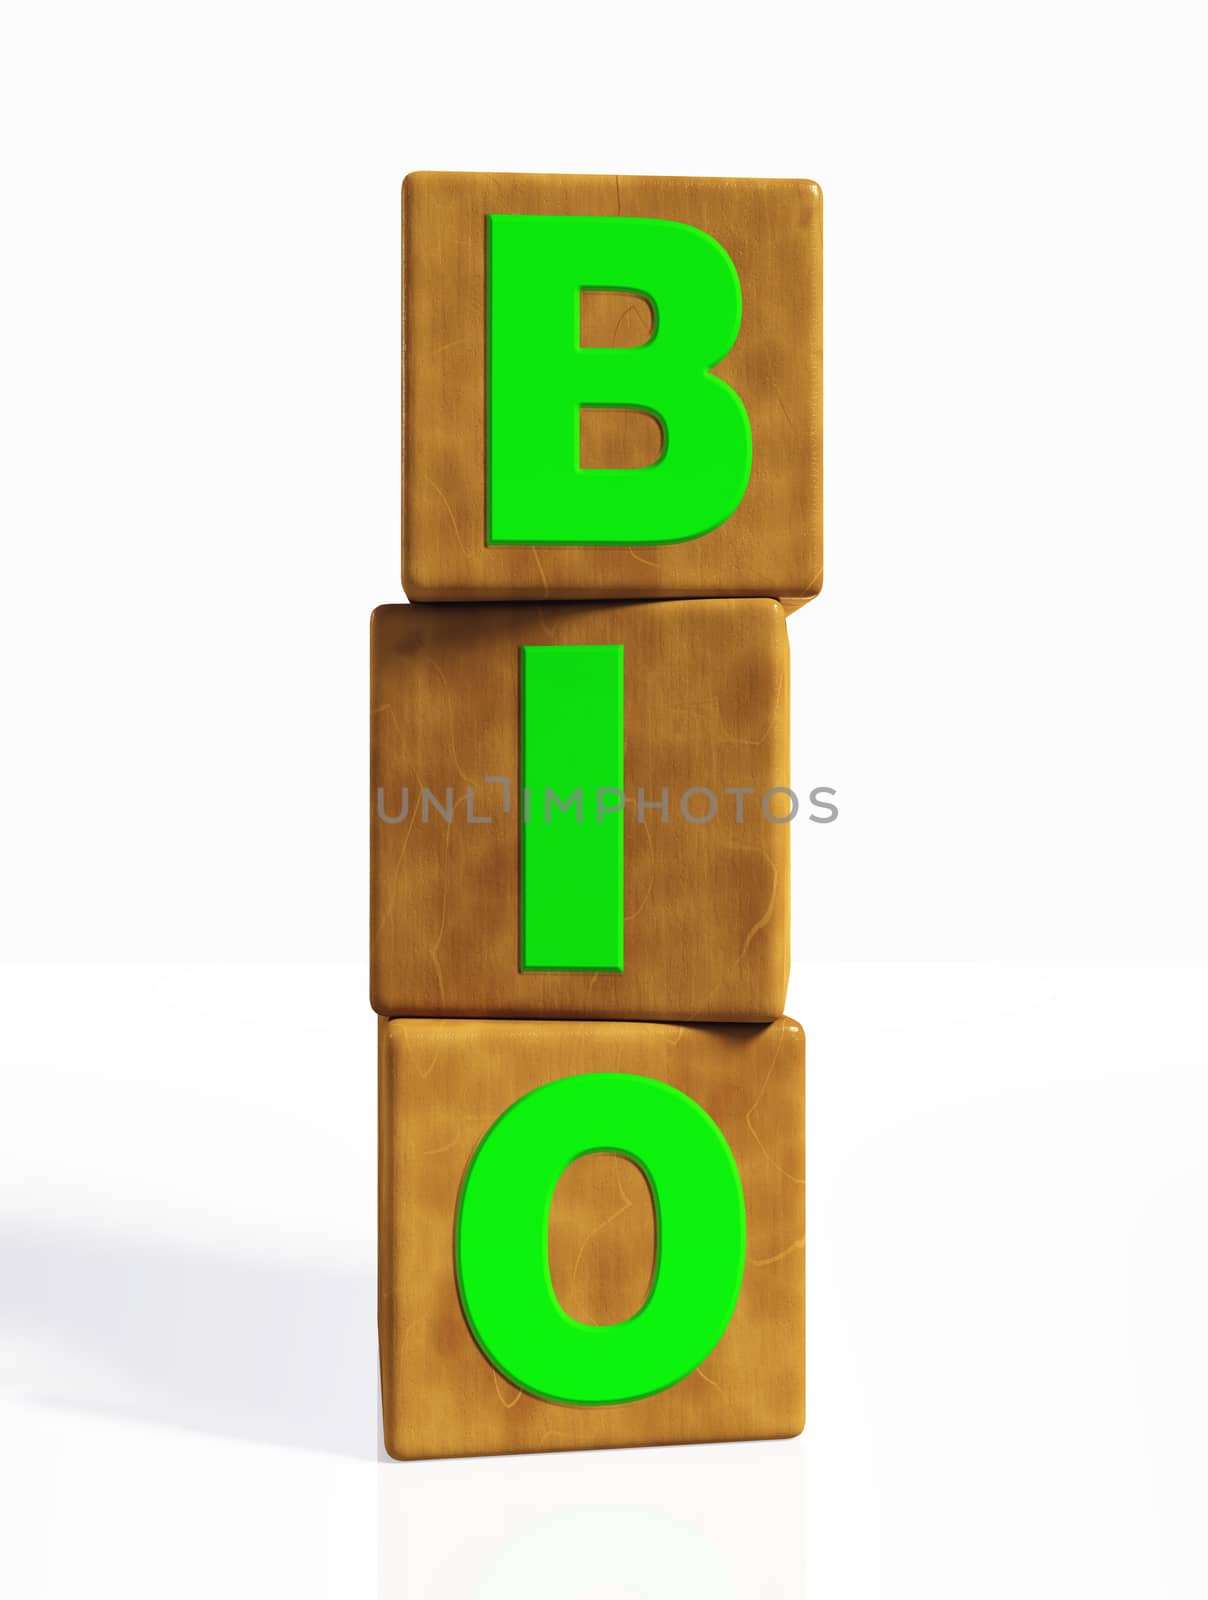 bio word composed from green letters on cubes made of wood, placed in a vertical position on a white background